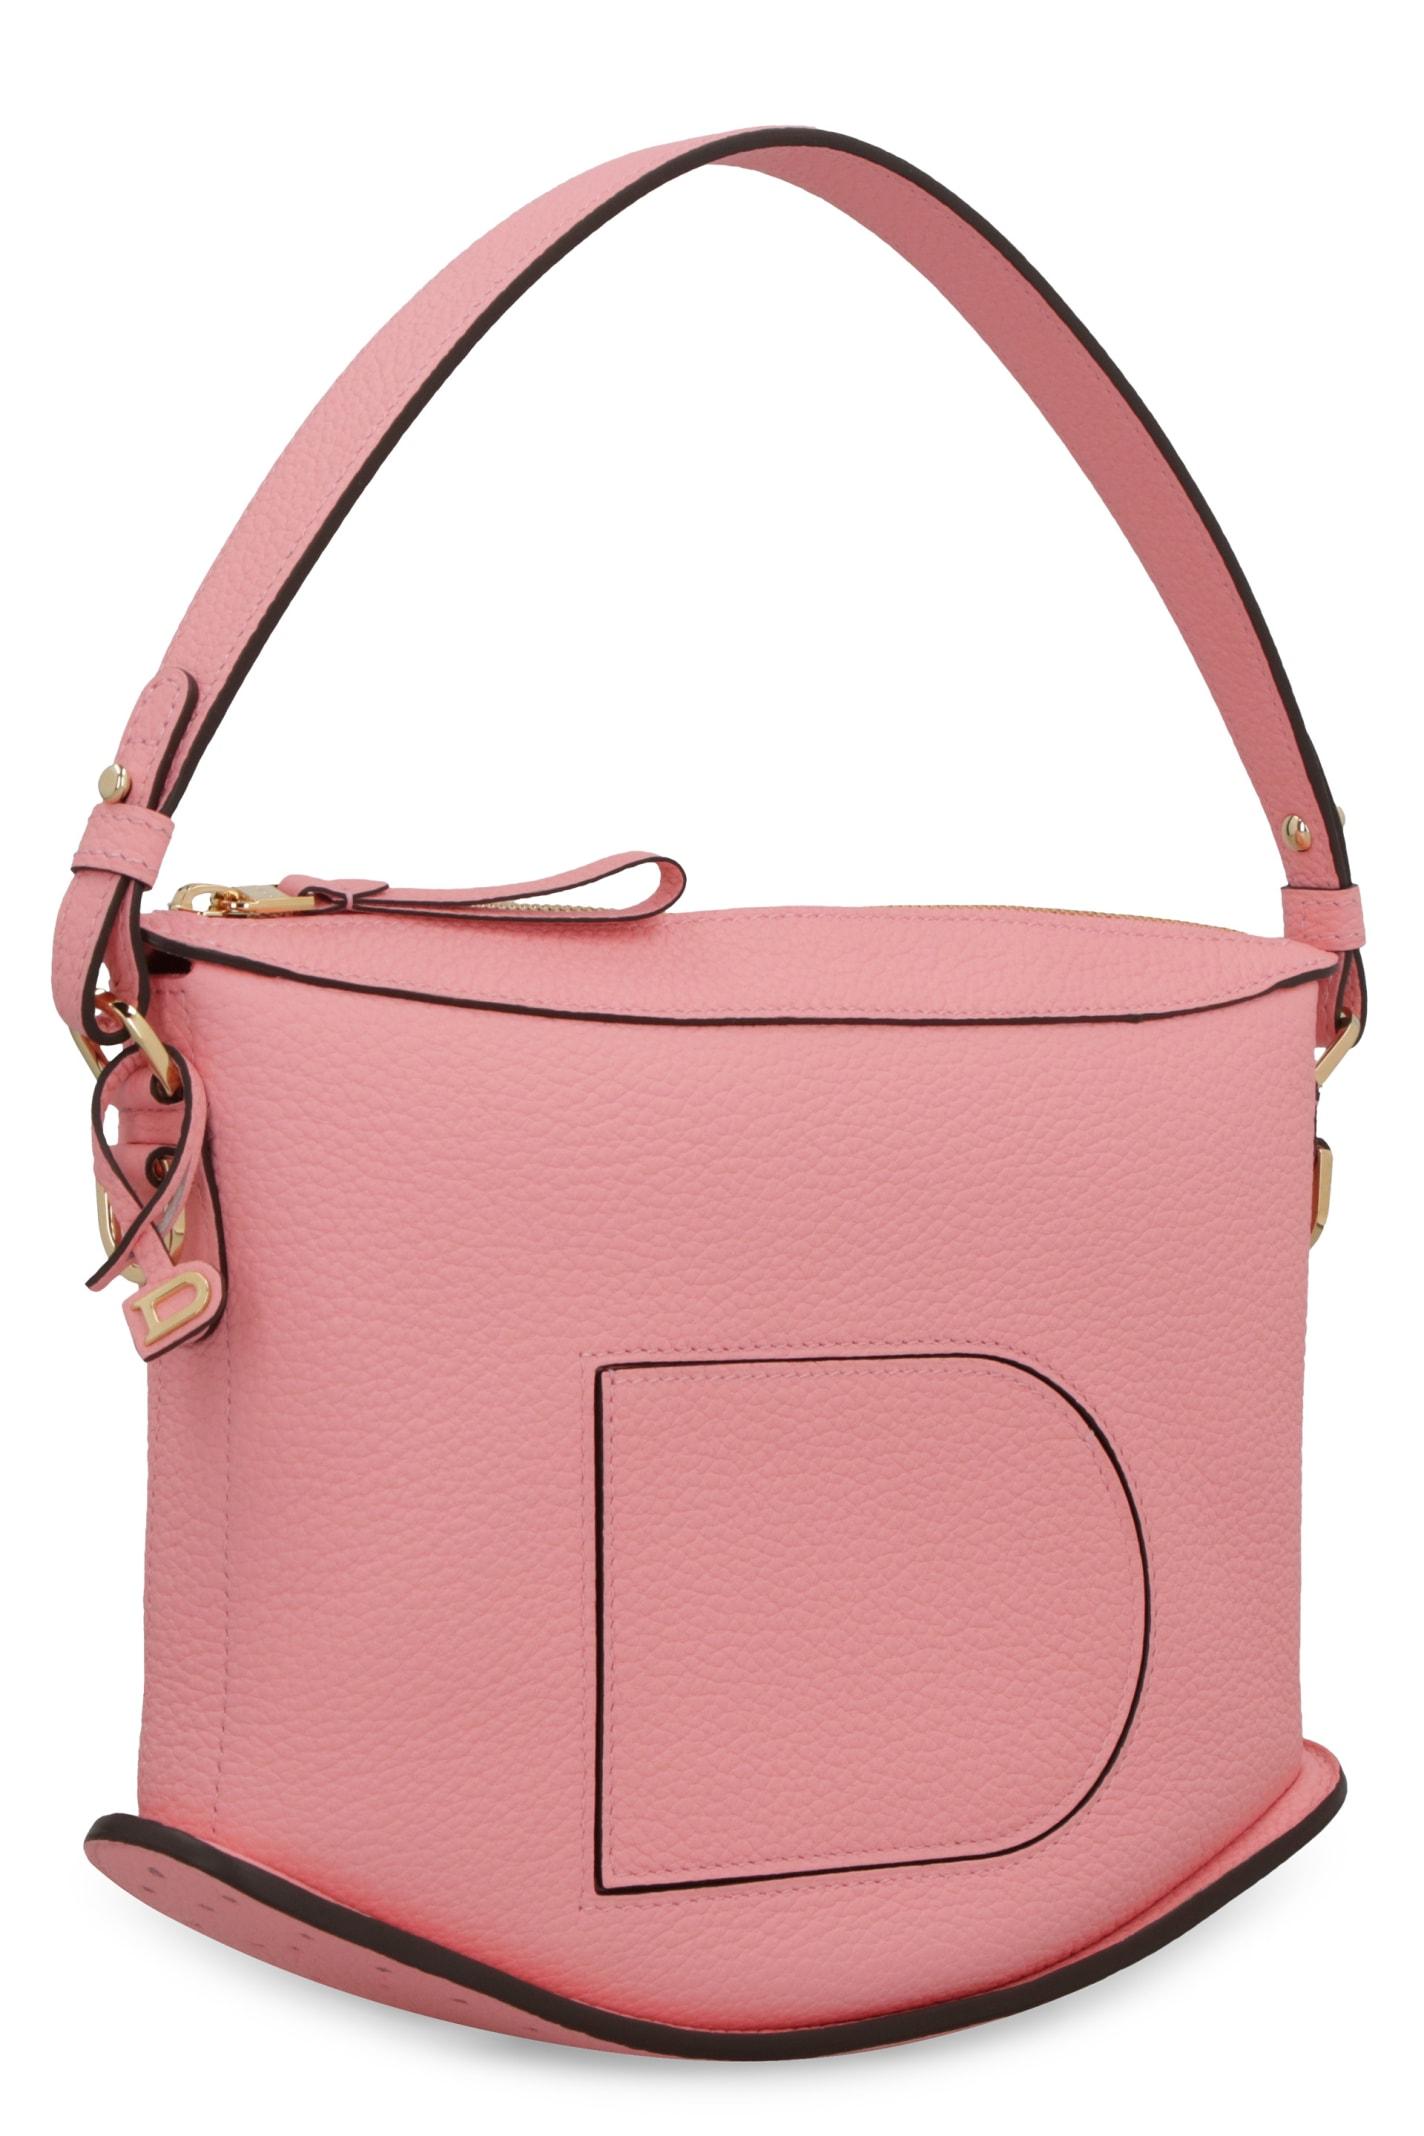 Delvaux Pin Swing Leather Handbag in Pink